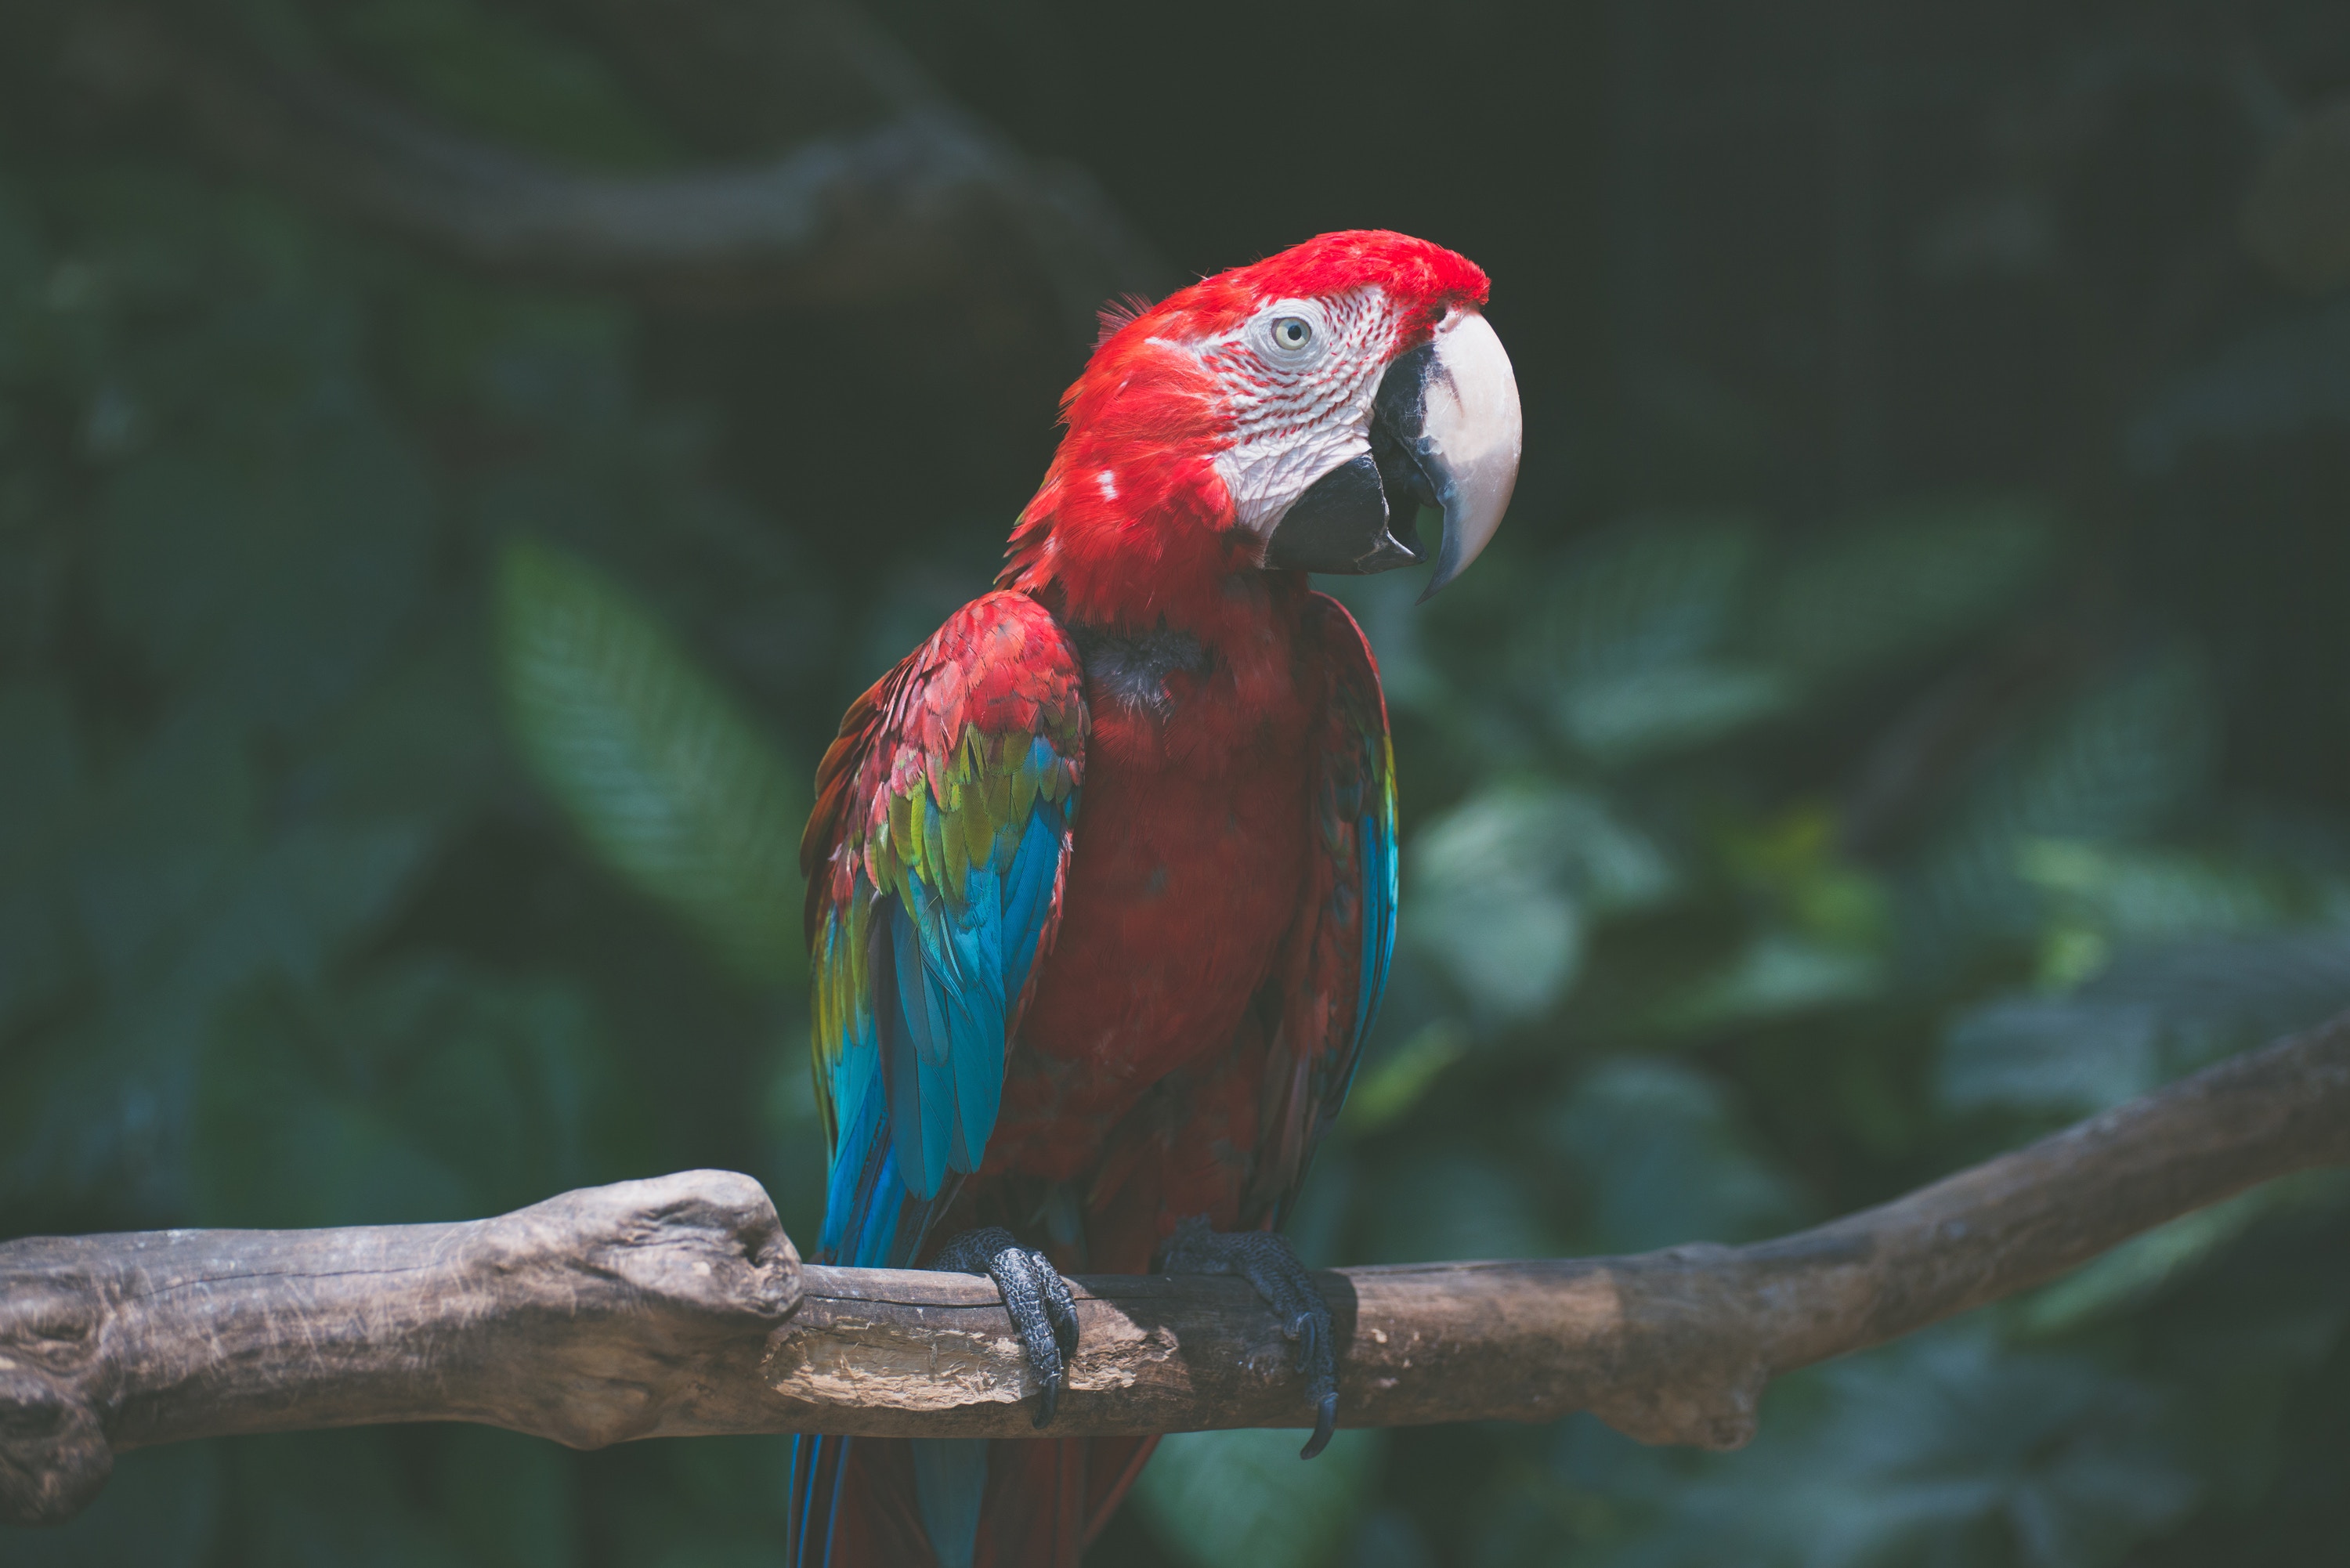  Macaw HQ Background Images